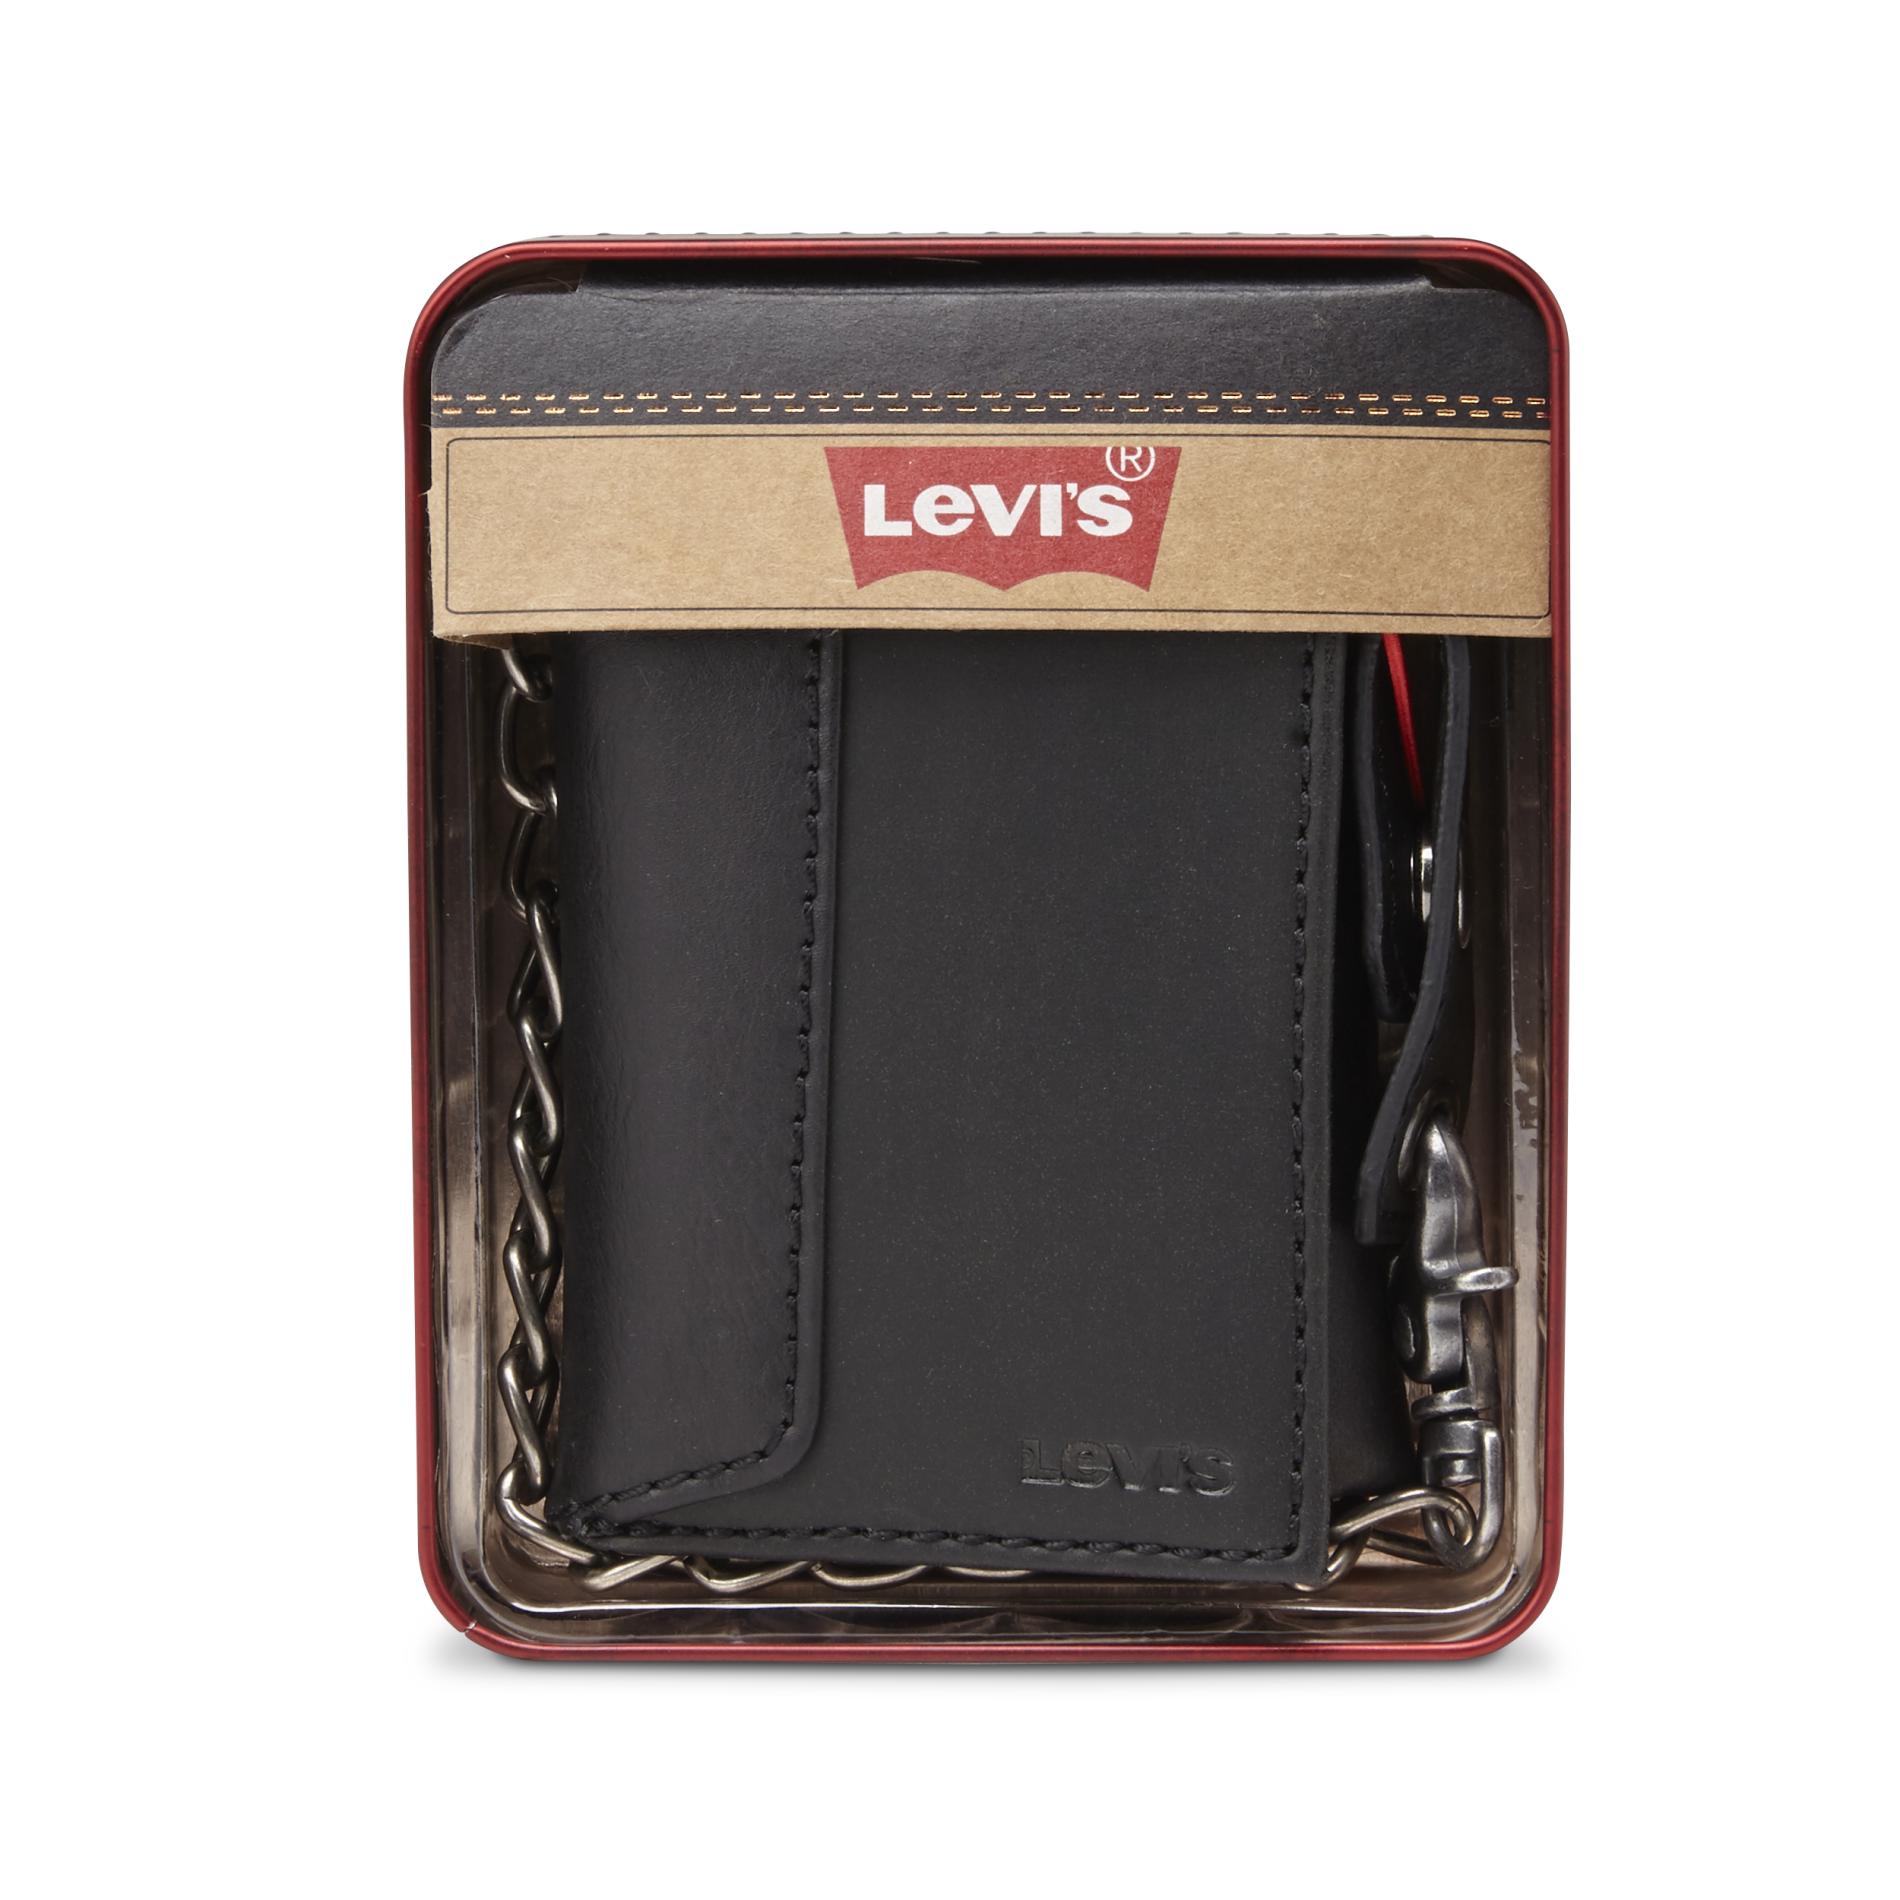 Levi's Men's Leather Trifold Chain Wallet